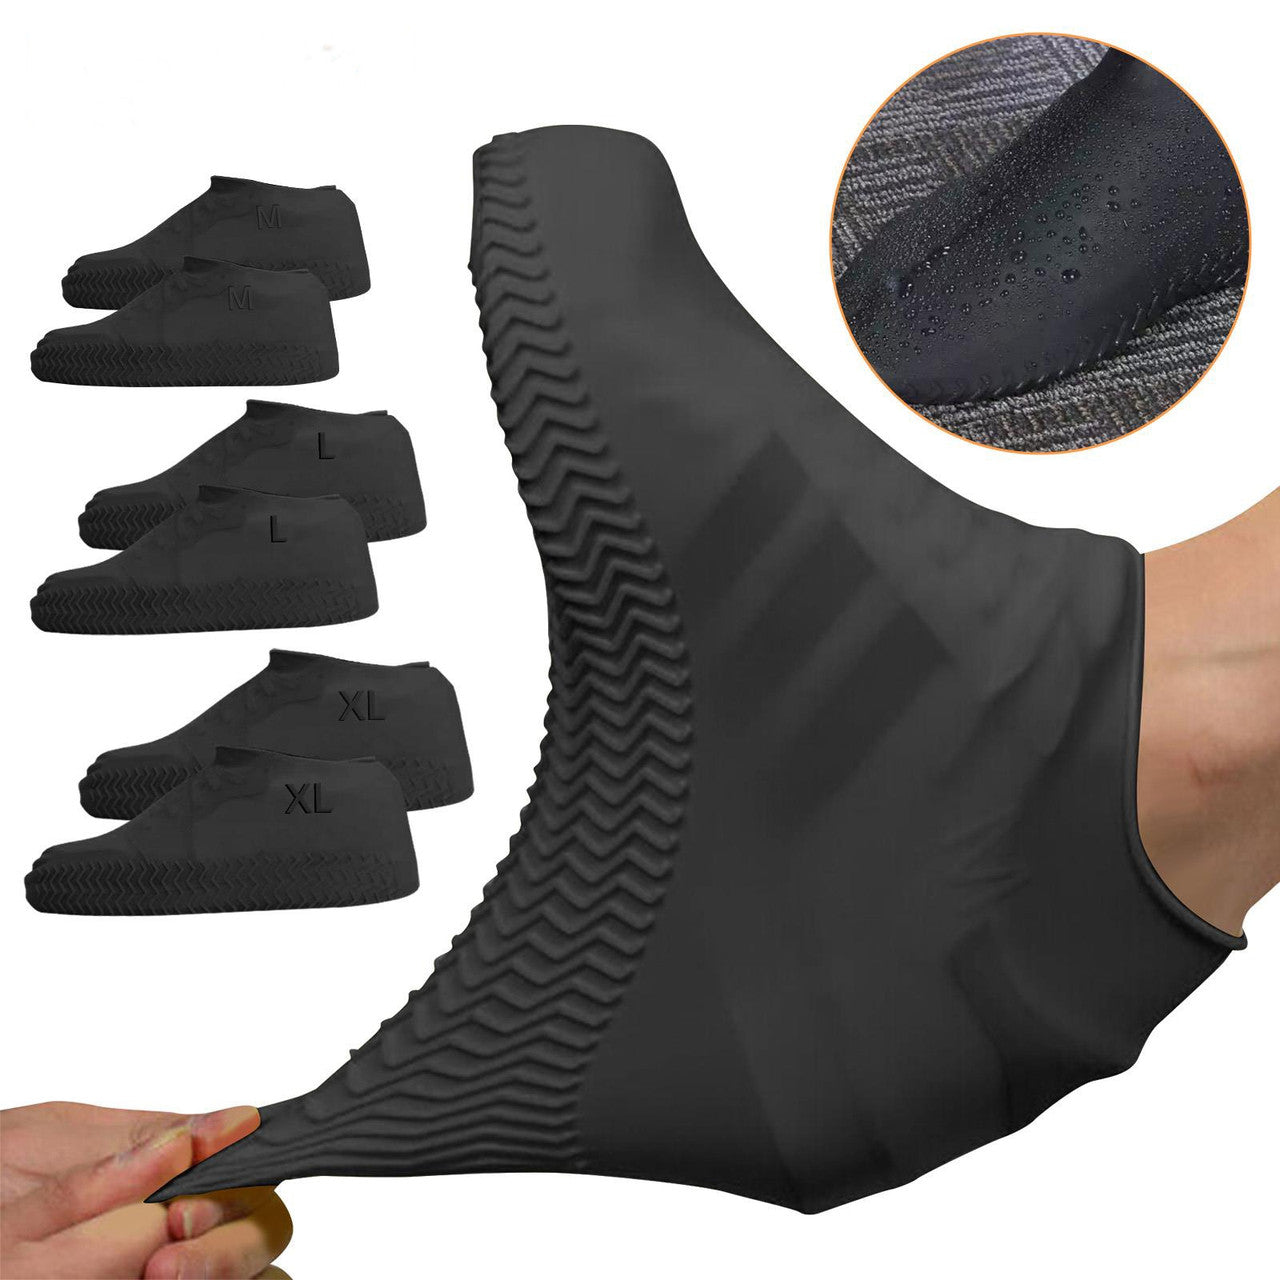 Waterproof Silicone Rain Shoe Cover - Non Slip,Water Resistant,Reusable,Stretchable,Foldable Size M (Black)